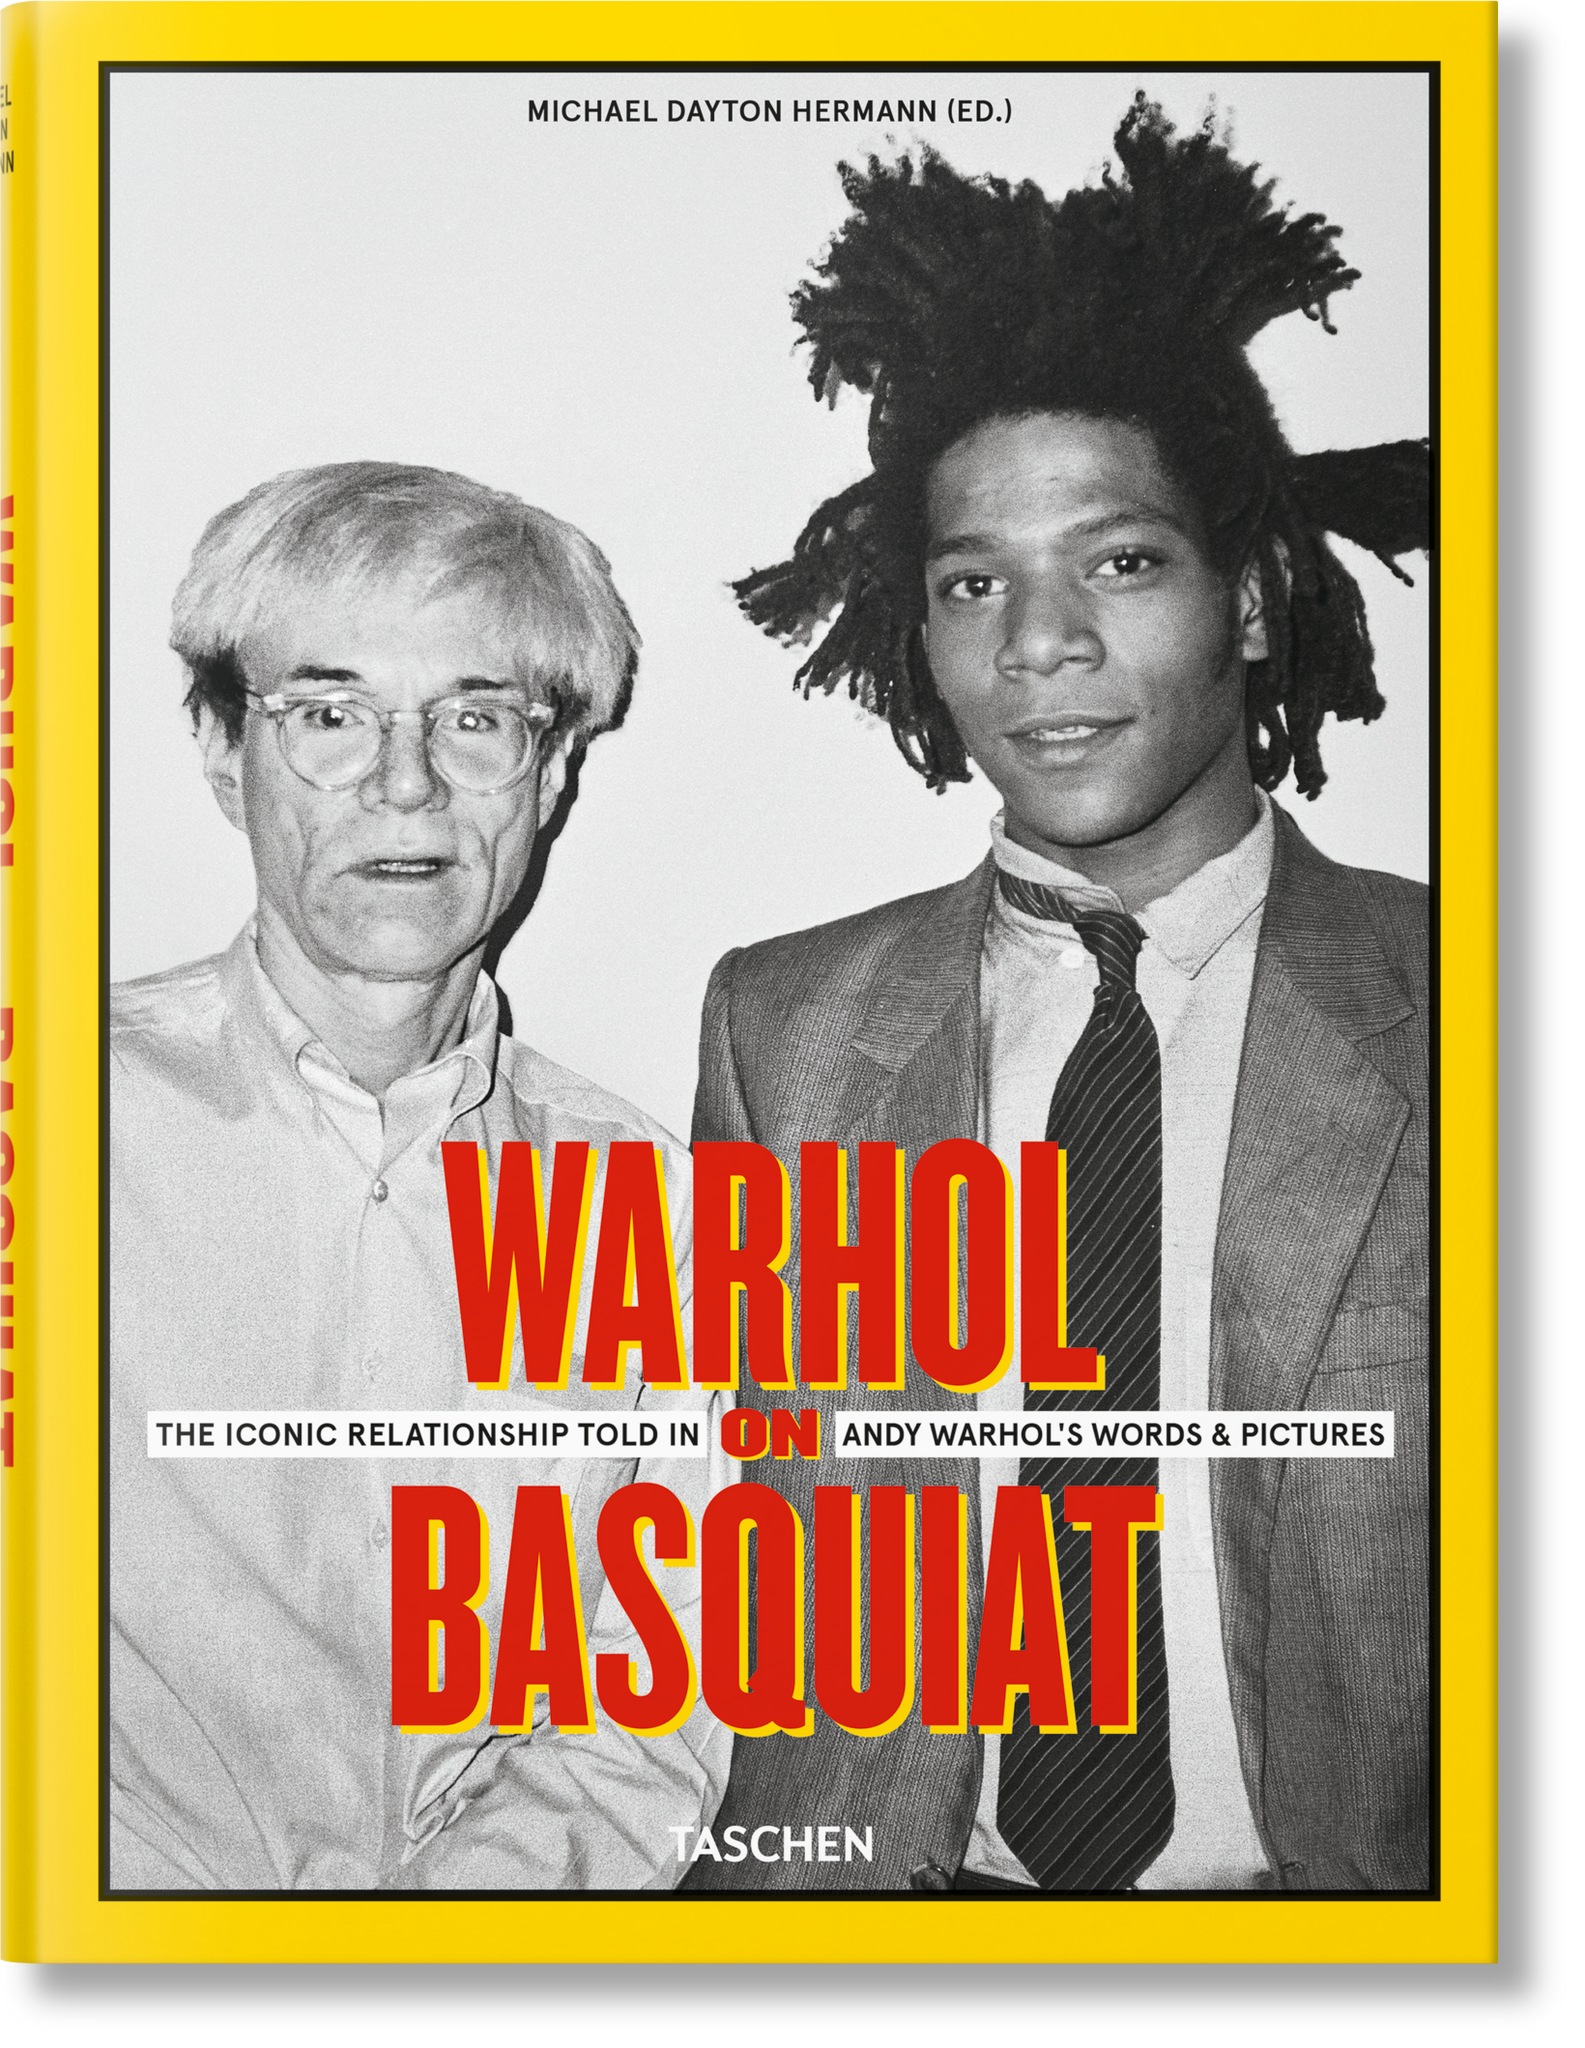 Warhol on Basquiat - The Iconic Relationship Told in Andy Warhol’s Words and Pictures - The Brant Foundation Shop